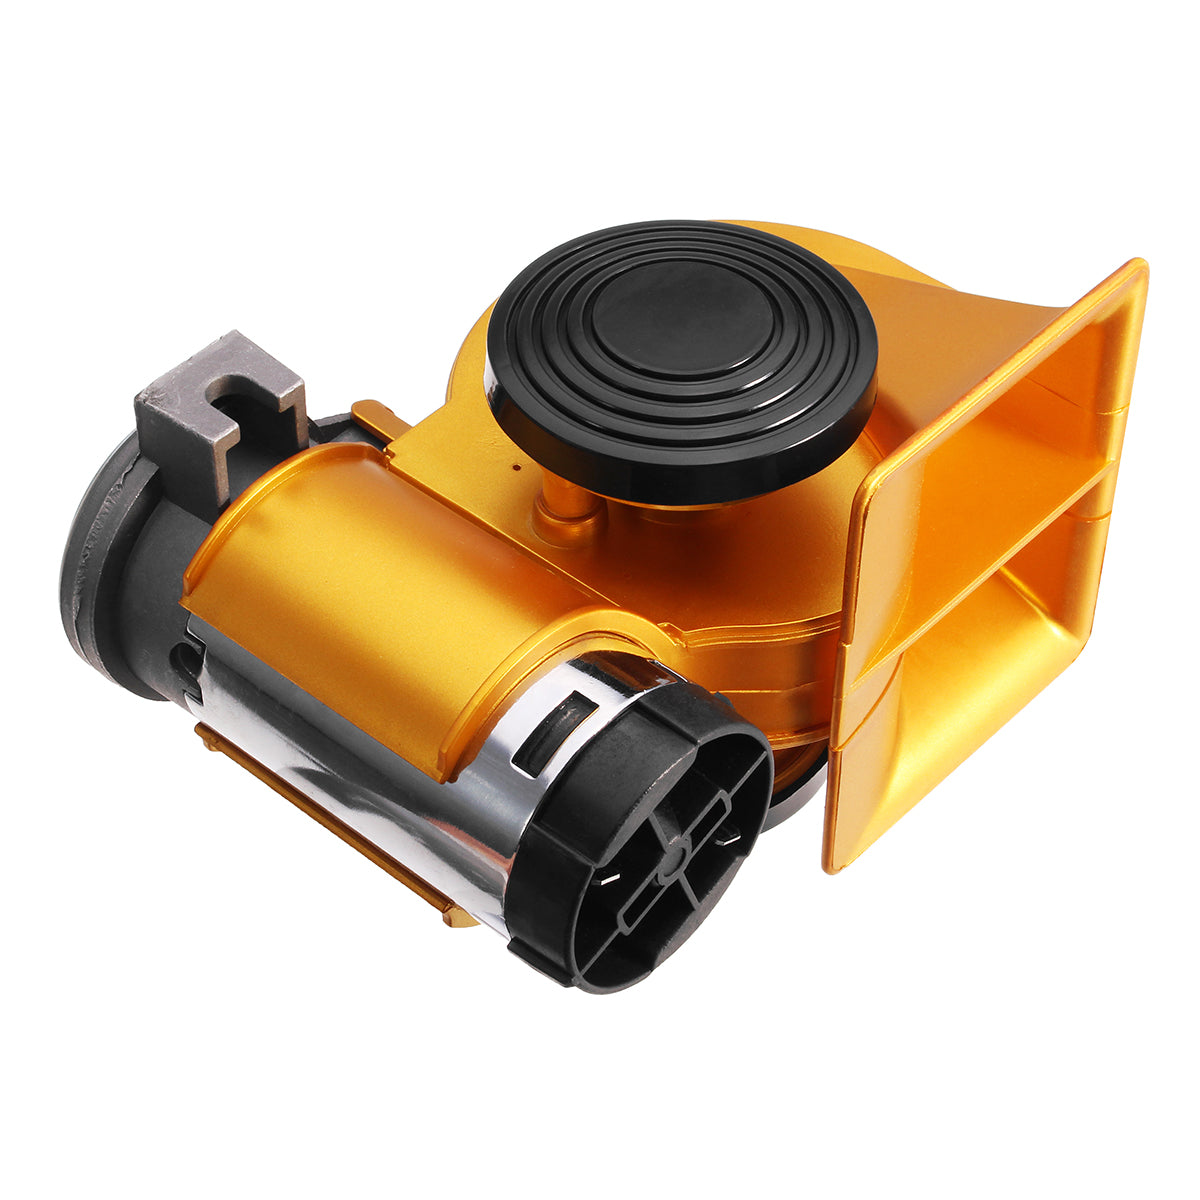 12V 139dB Electric Air Horn Dual Tone Trumpet Loud Pump with Compressor for Car Truck Motorcycle - Auto GoShop